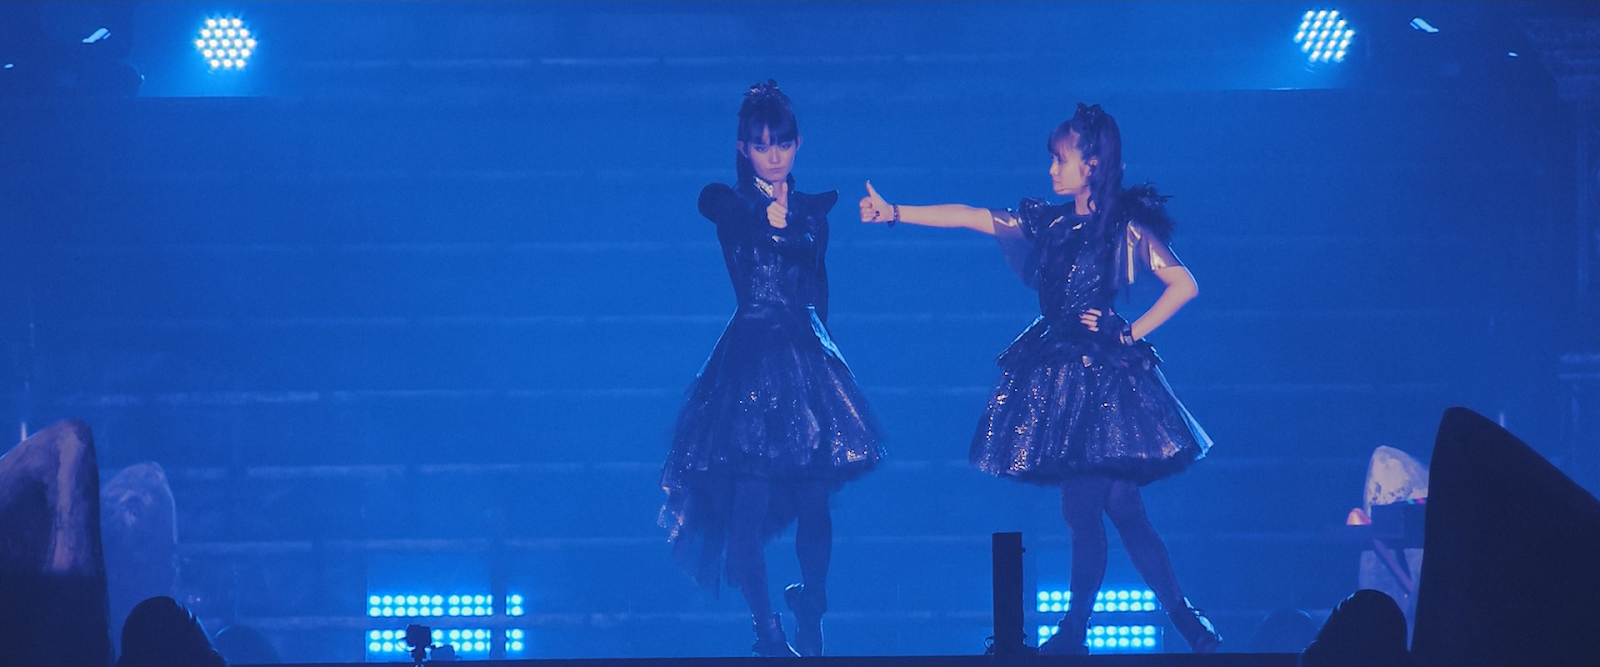 SU-METAL and MOAMETAL performing Ijime Dame Zettai at Legend S without YUIMETAL